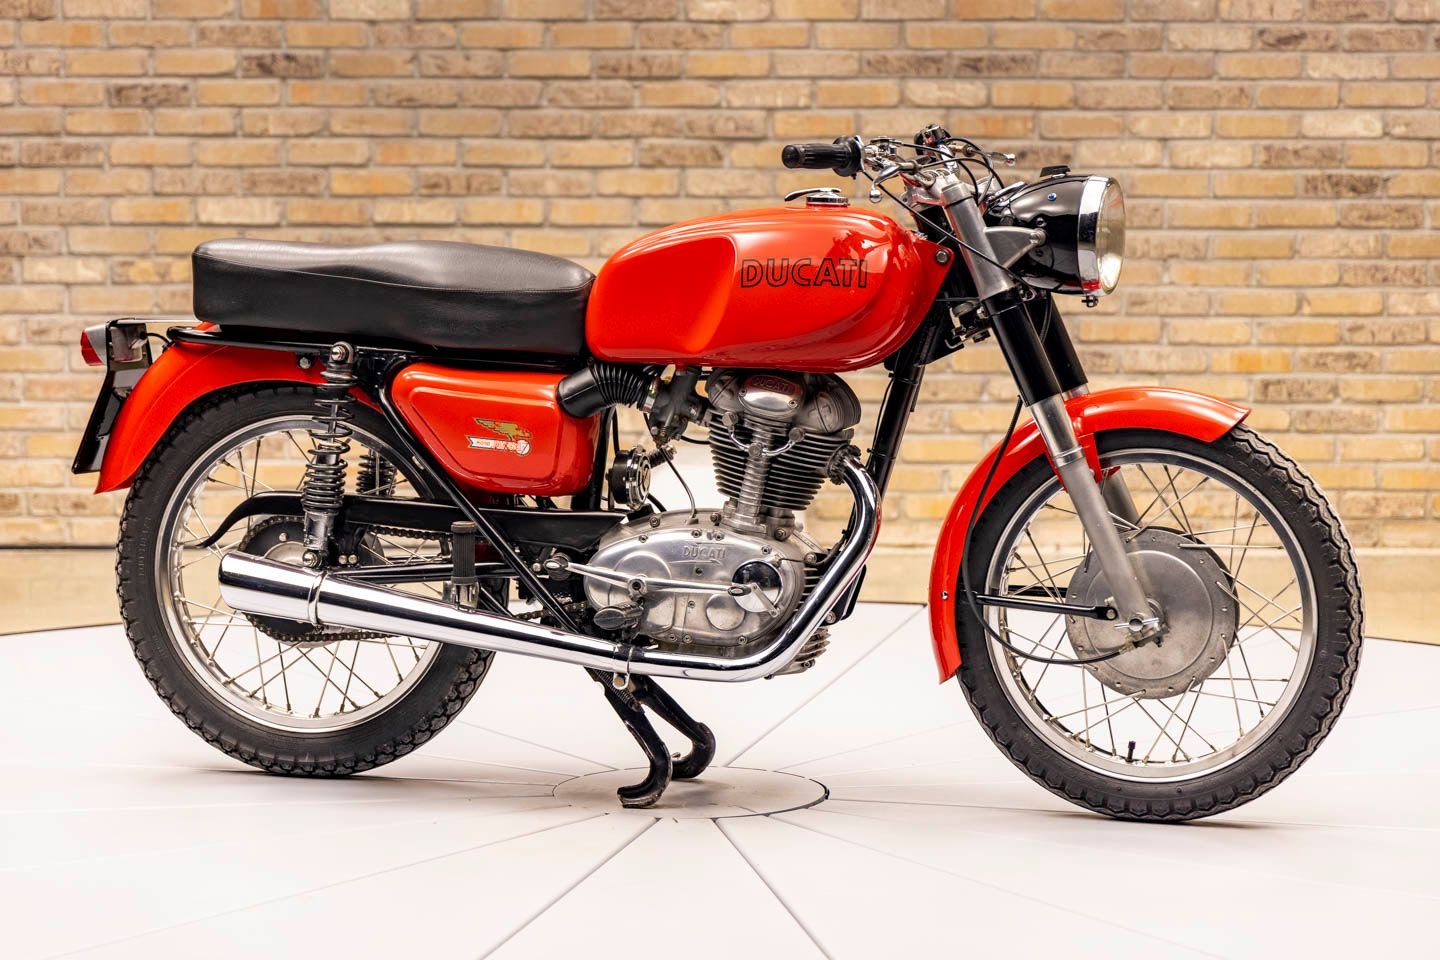 813112 | 1967 Ducati 250 Monza | Throttlestop | Automotive and Motorcycle Consignment Dealer